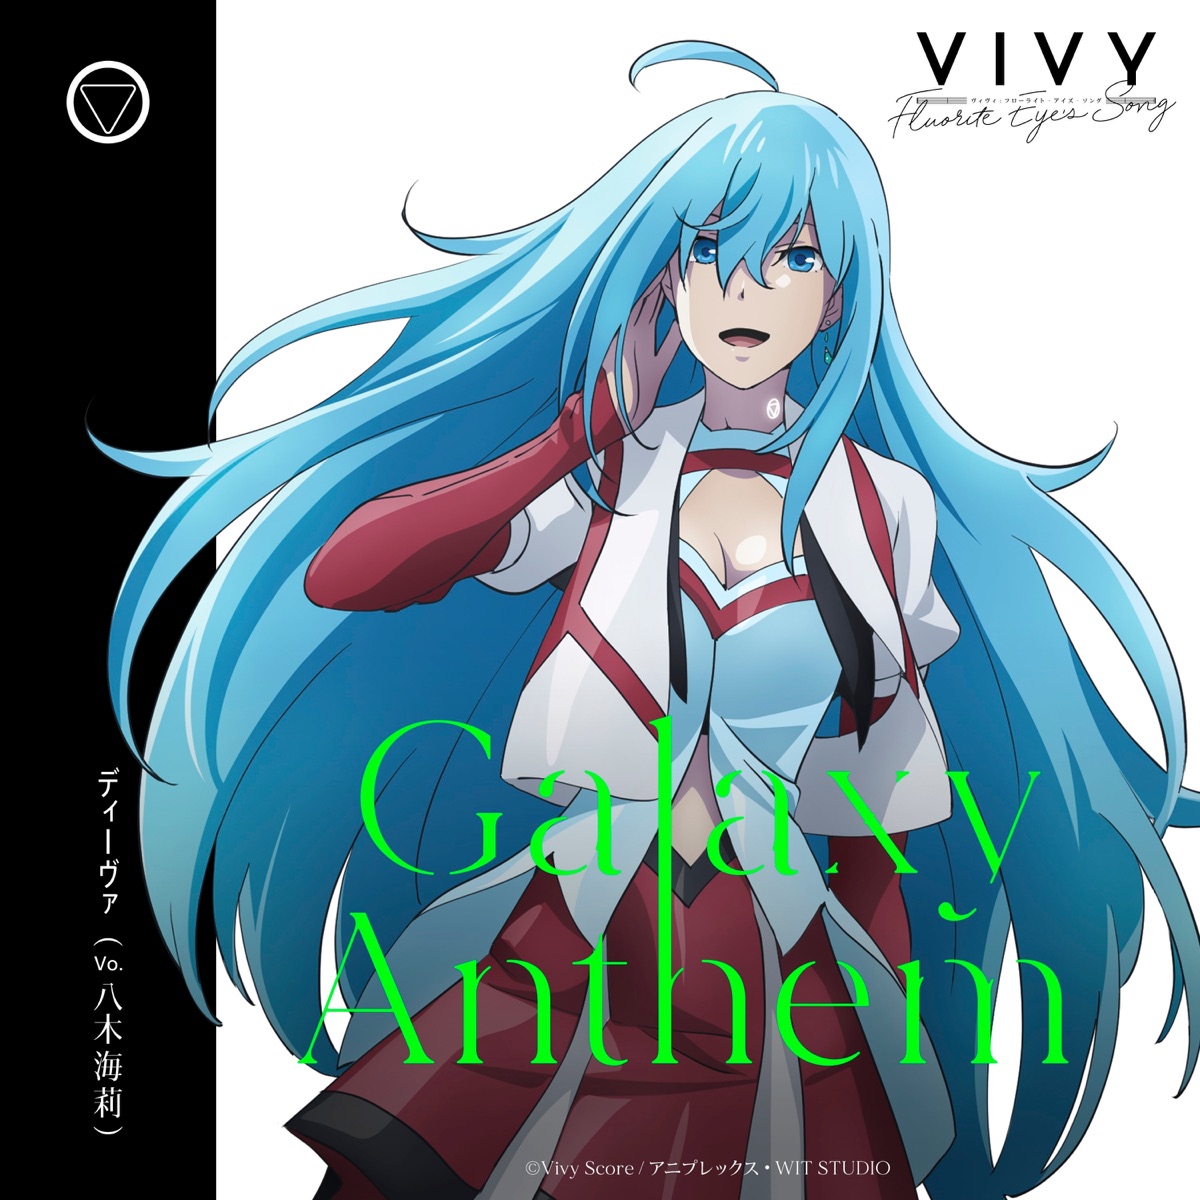 Cover art for『Diva (Kairi Yagi) - Galaxy Anthem』from the release『Galaxy Anthem』